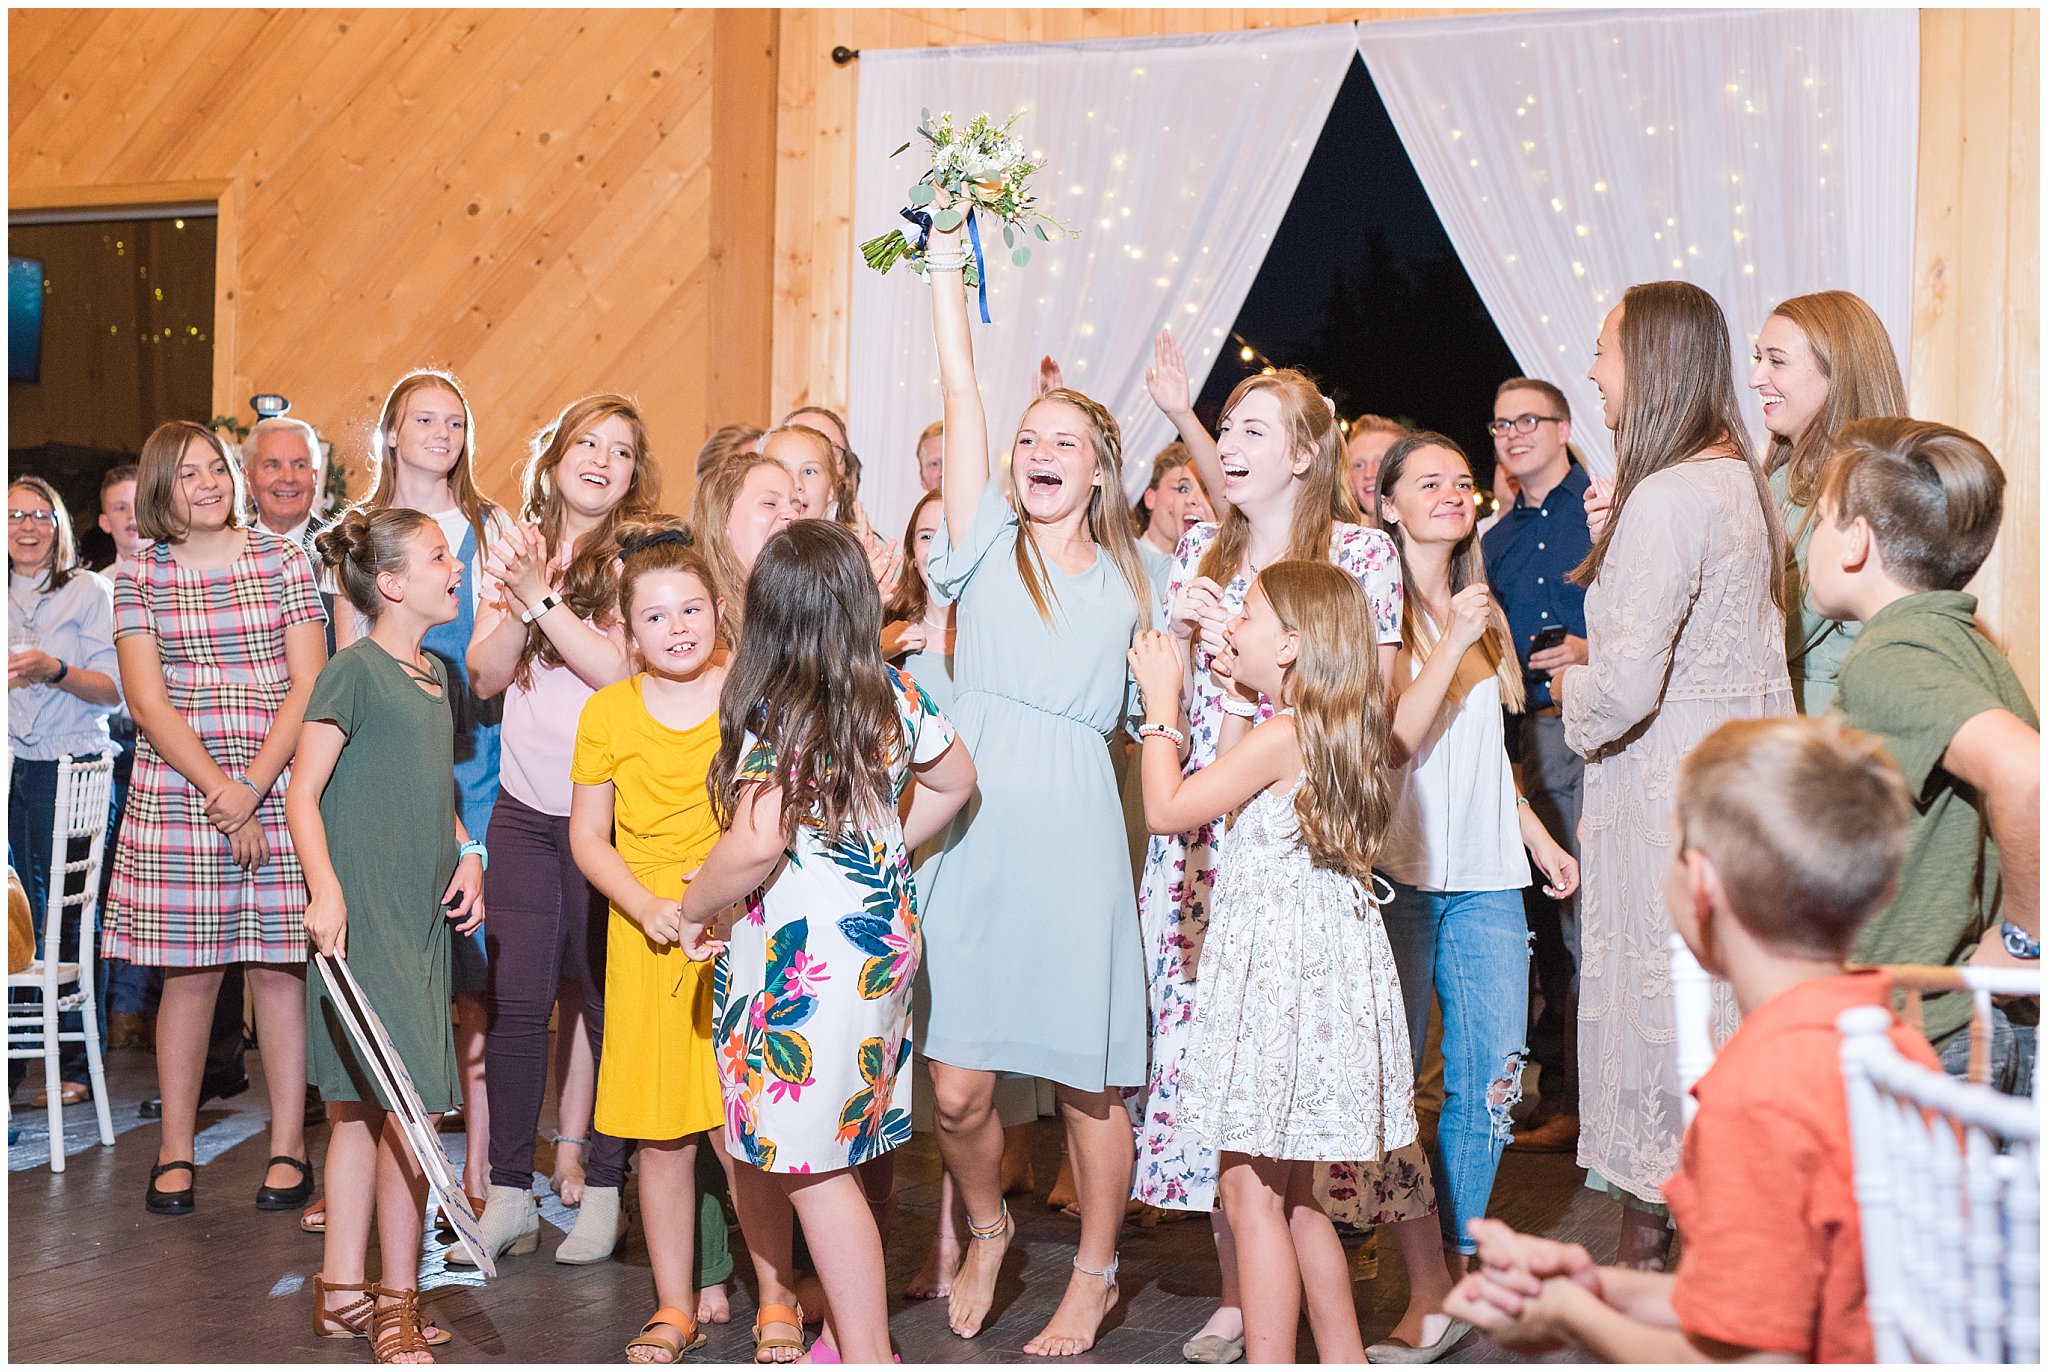 Excited brides maid catches bouquet | Top Utah Wedding and Couples Photos 2019 | Jessie and Dallin Photography